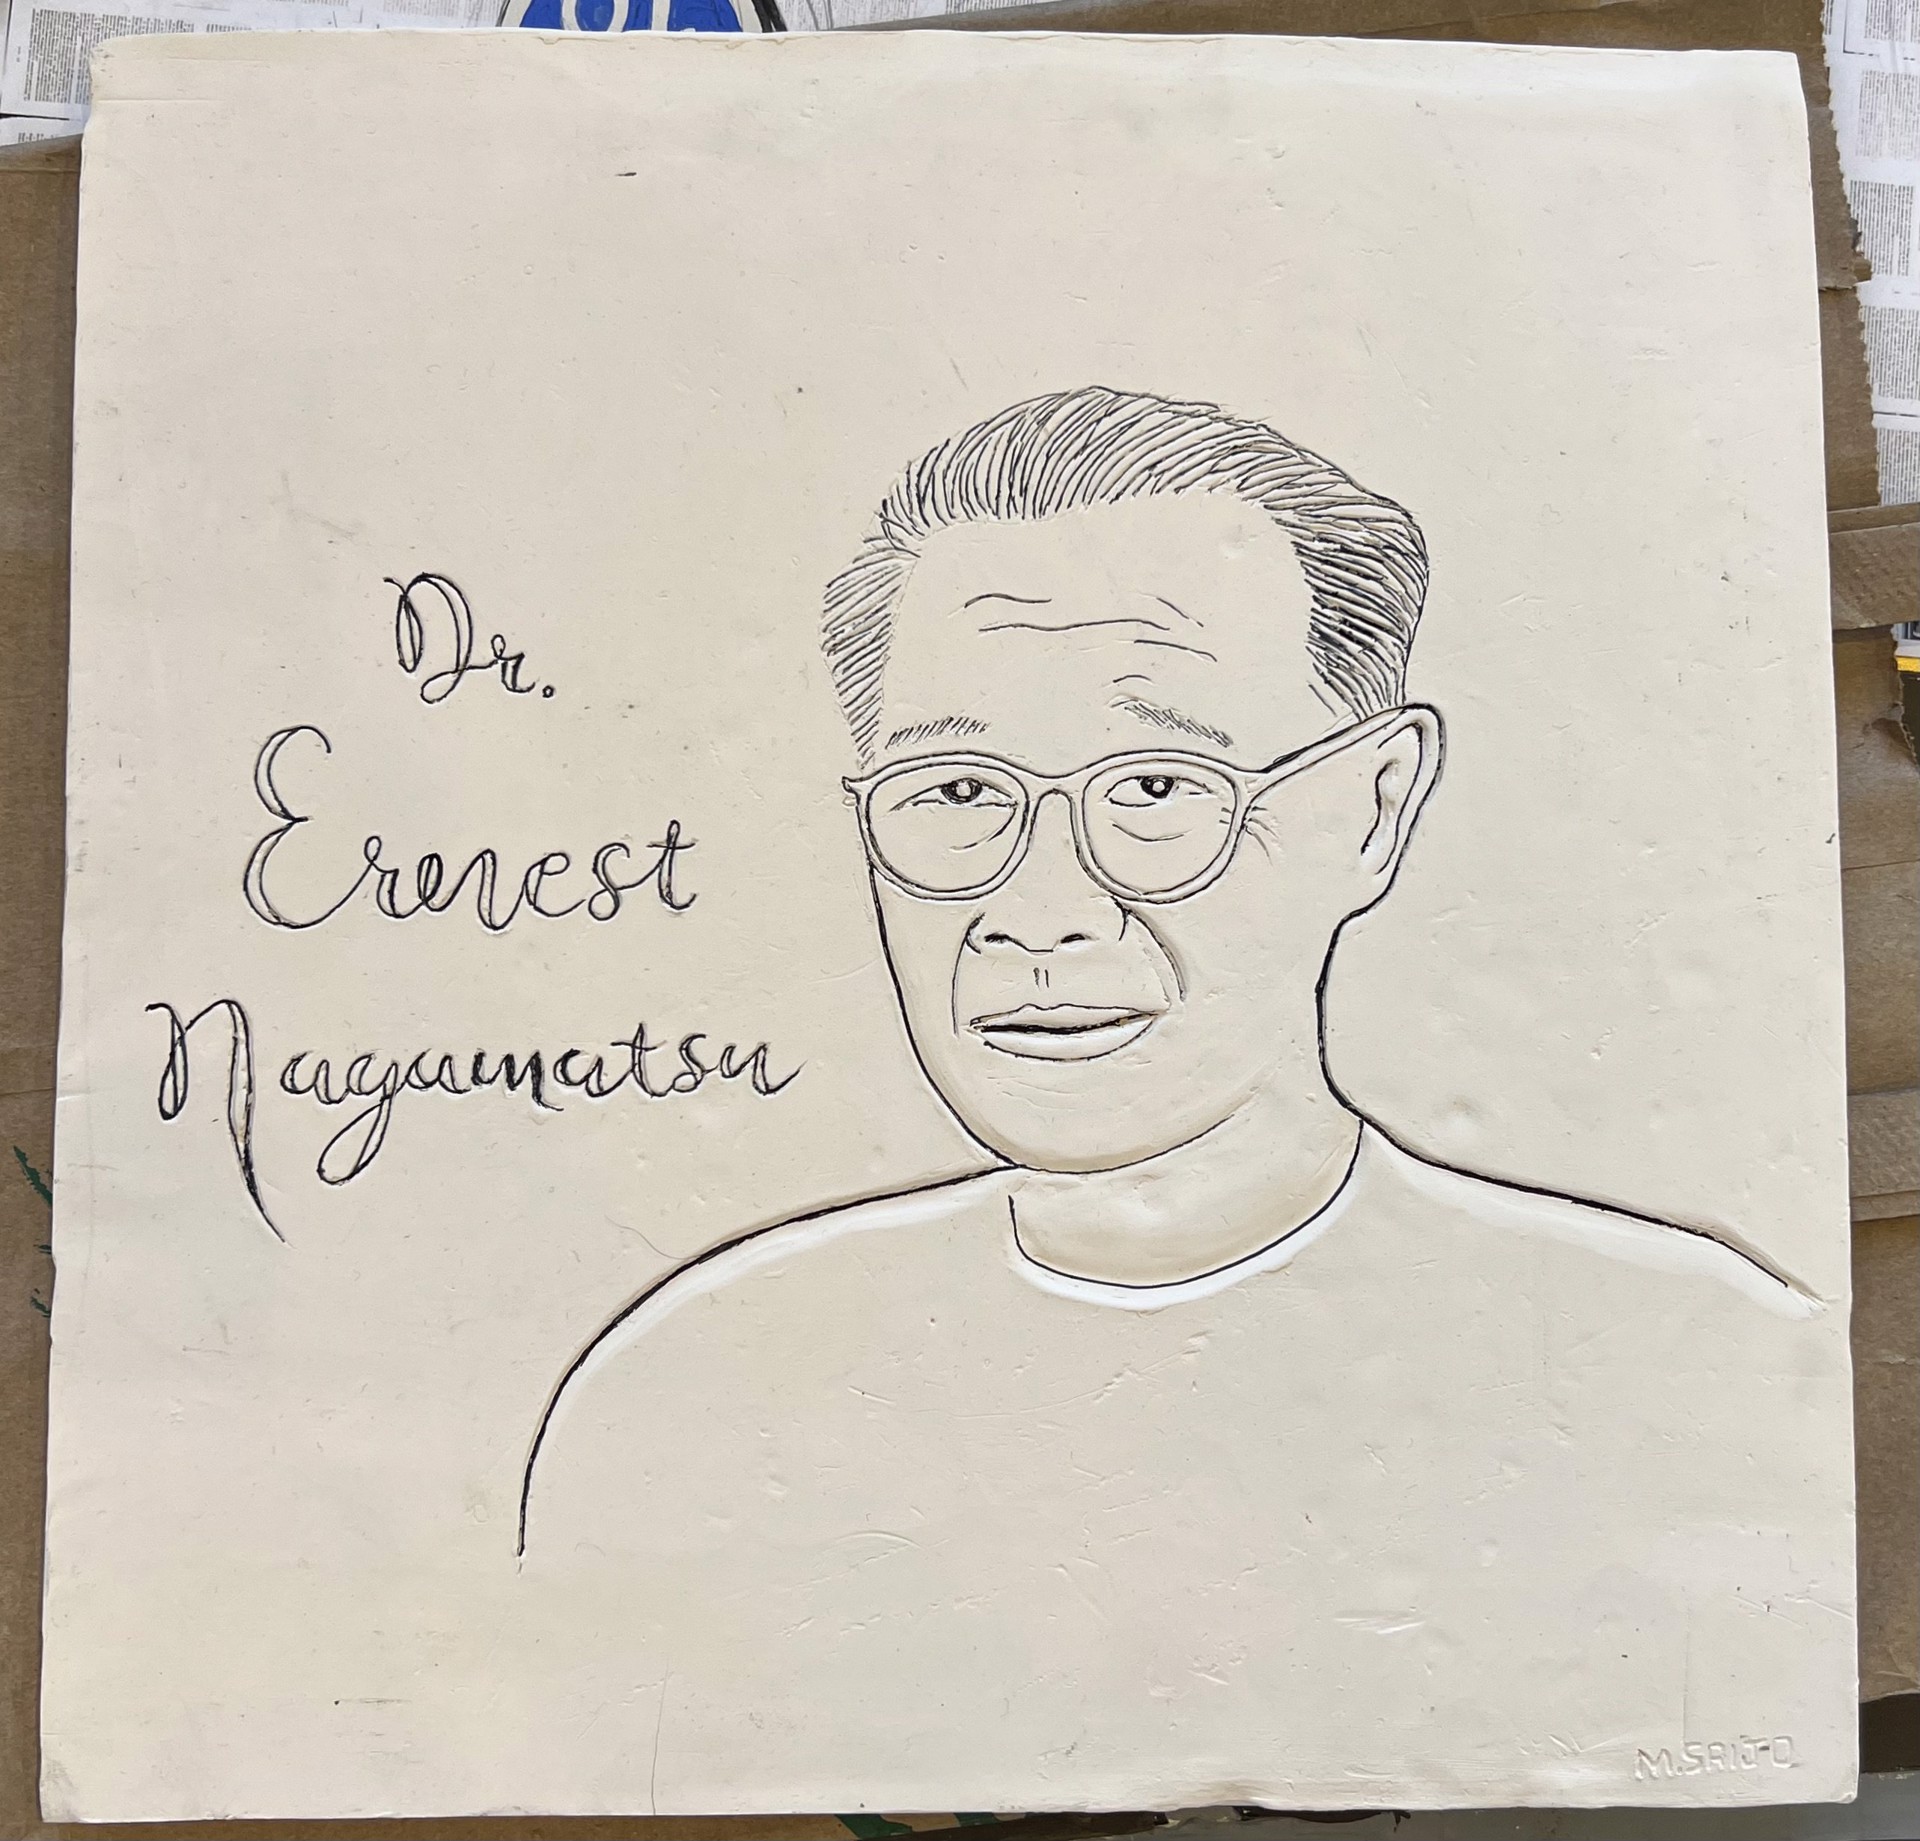 Portrait of Dr Ernest by Mike Saijo